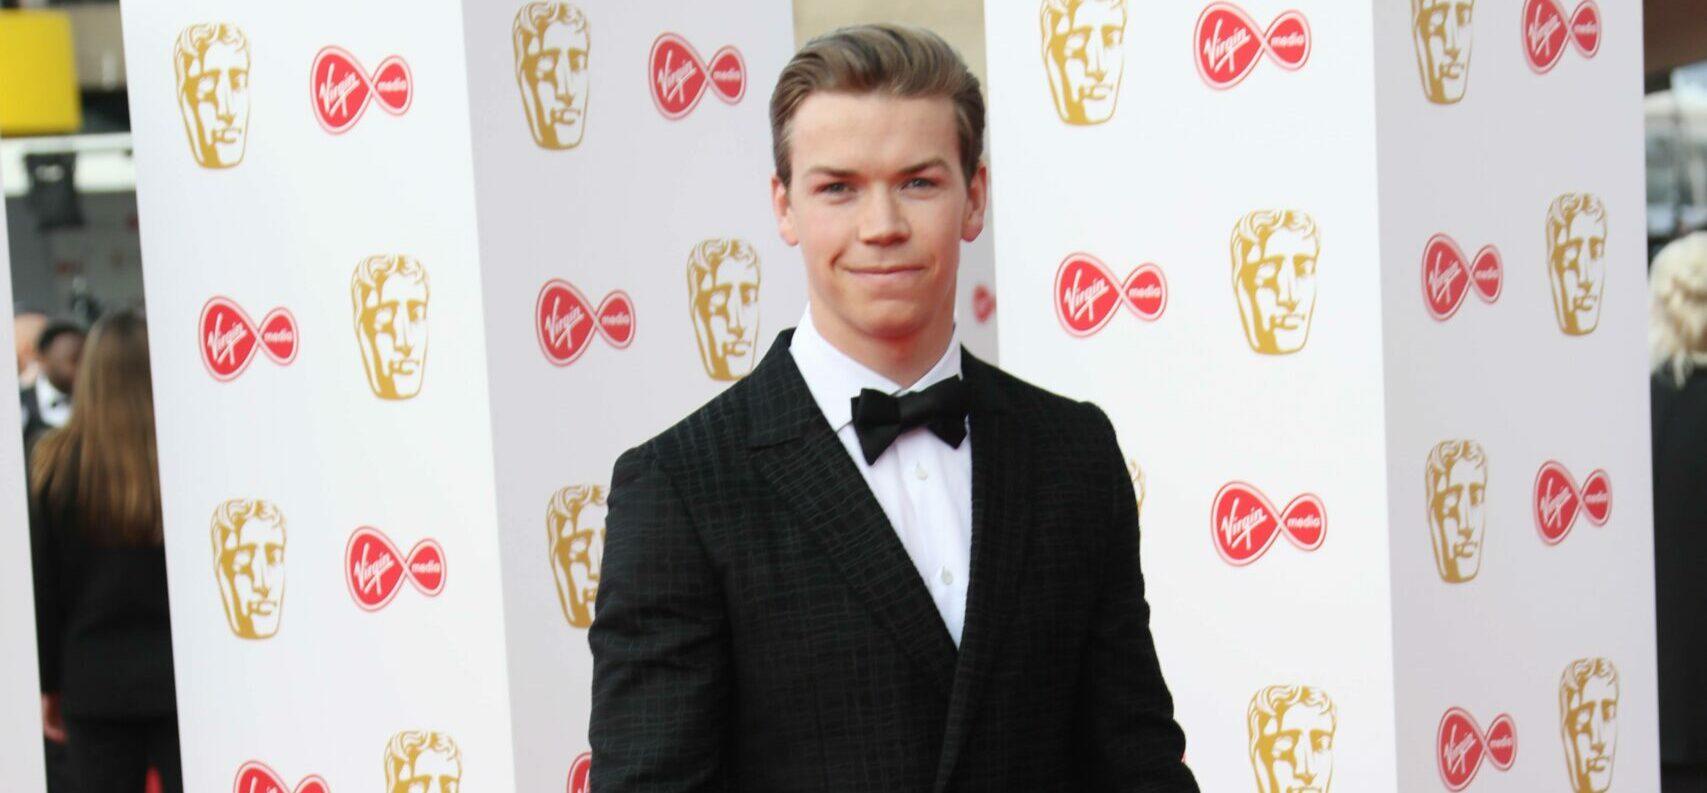 Hunky Will Poulter Says His Social Life ‘Took A Back Seat’ While Prepping For ‘Guardians’